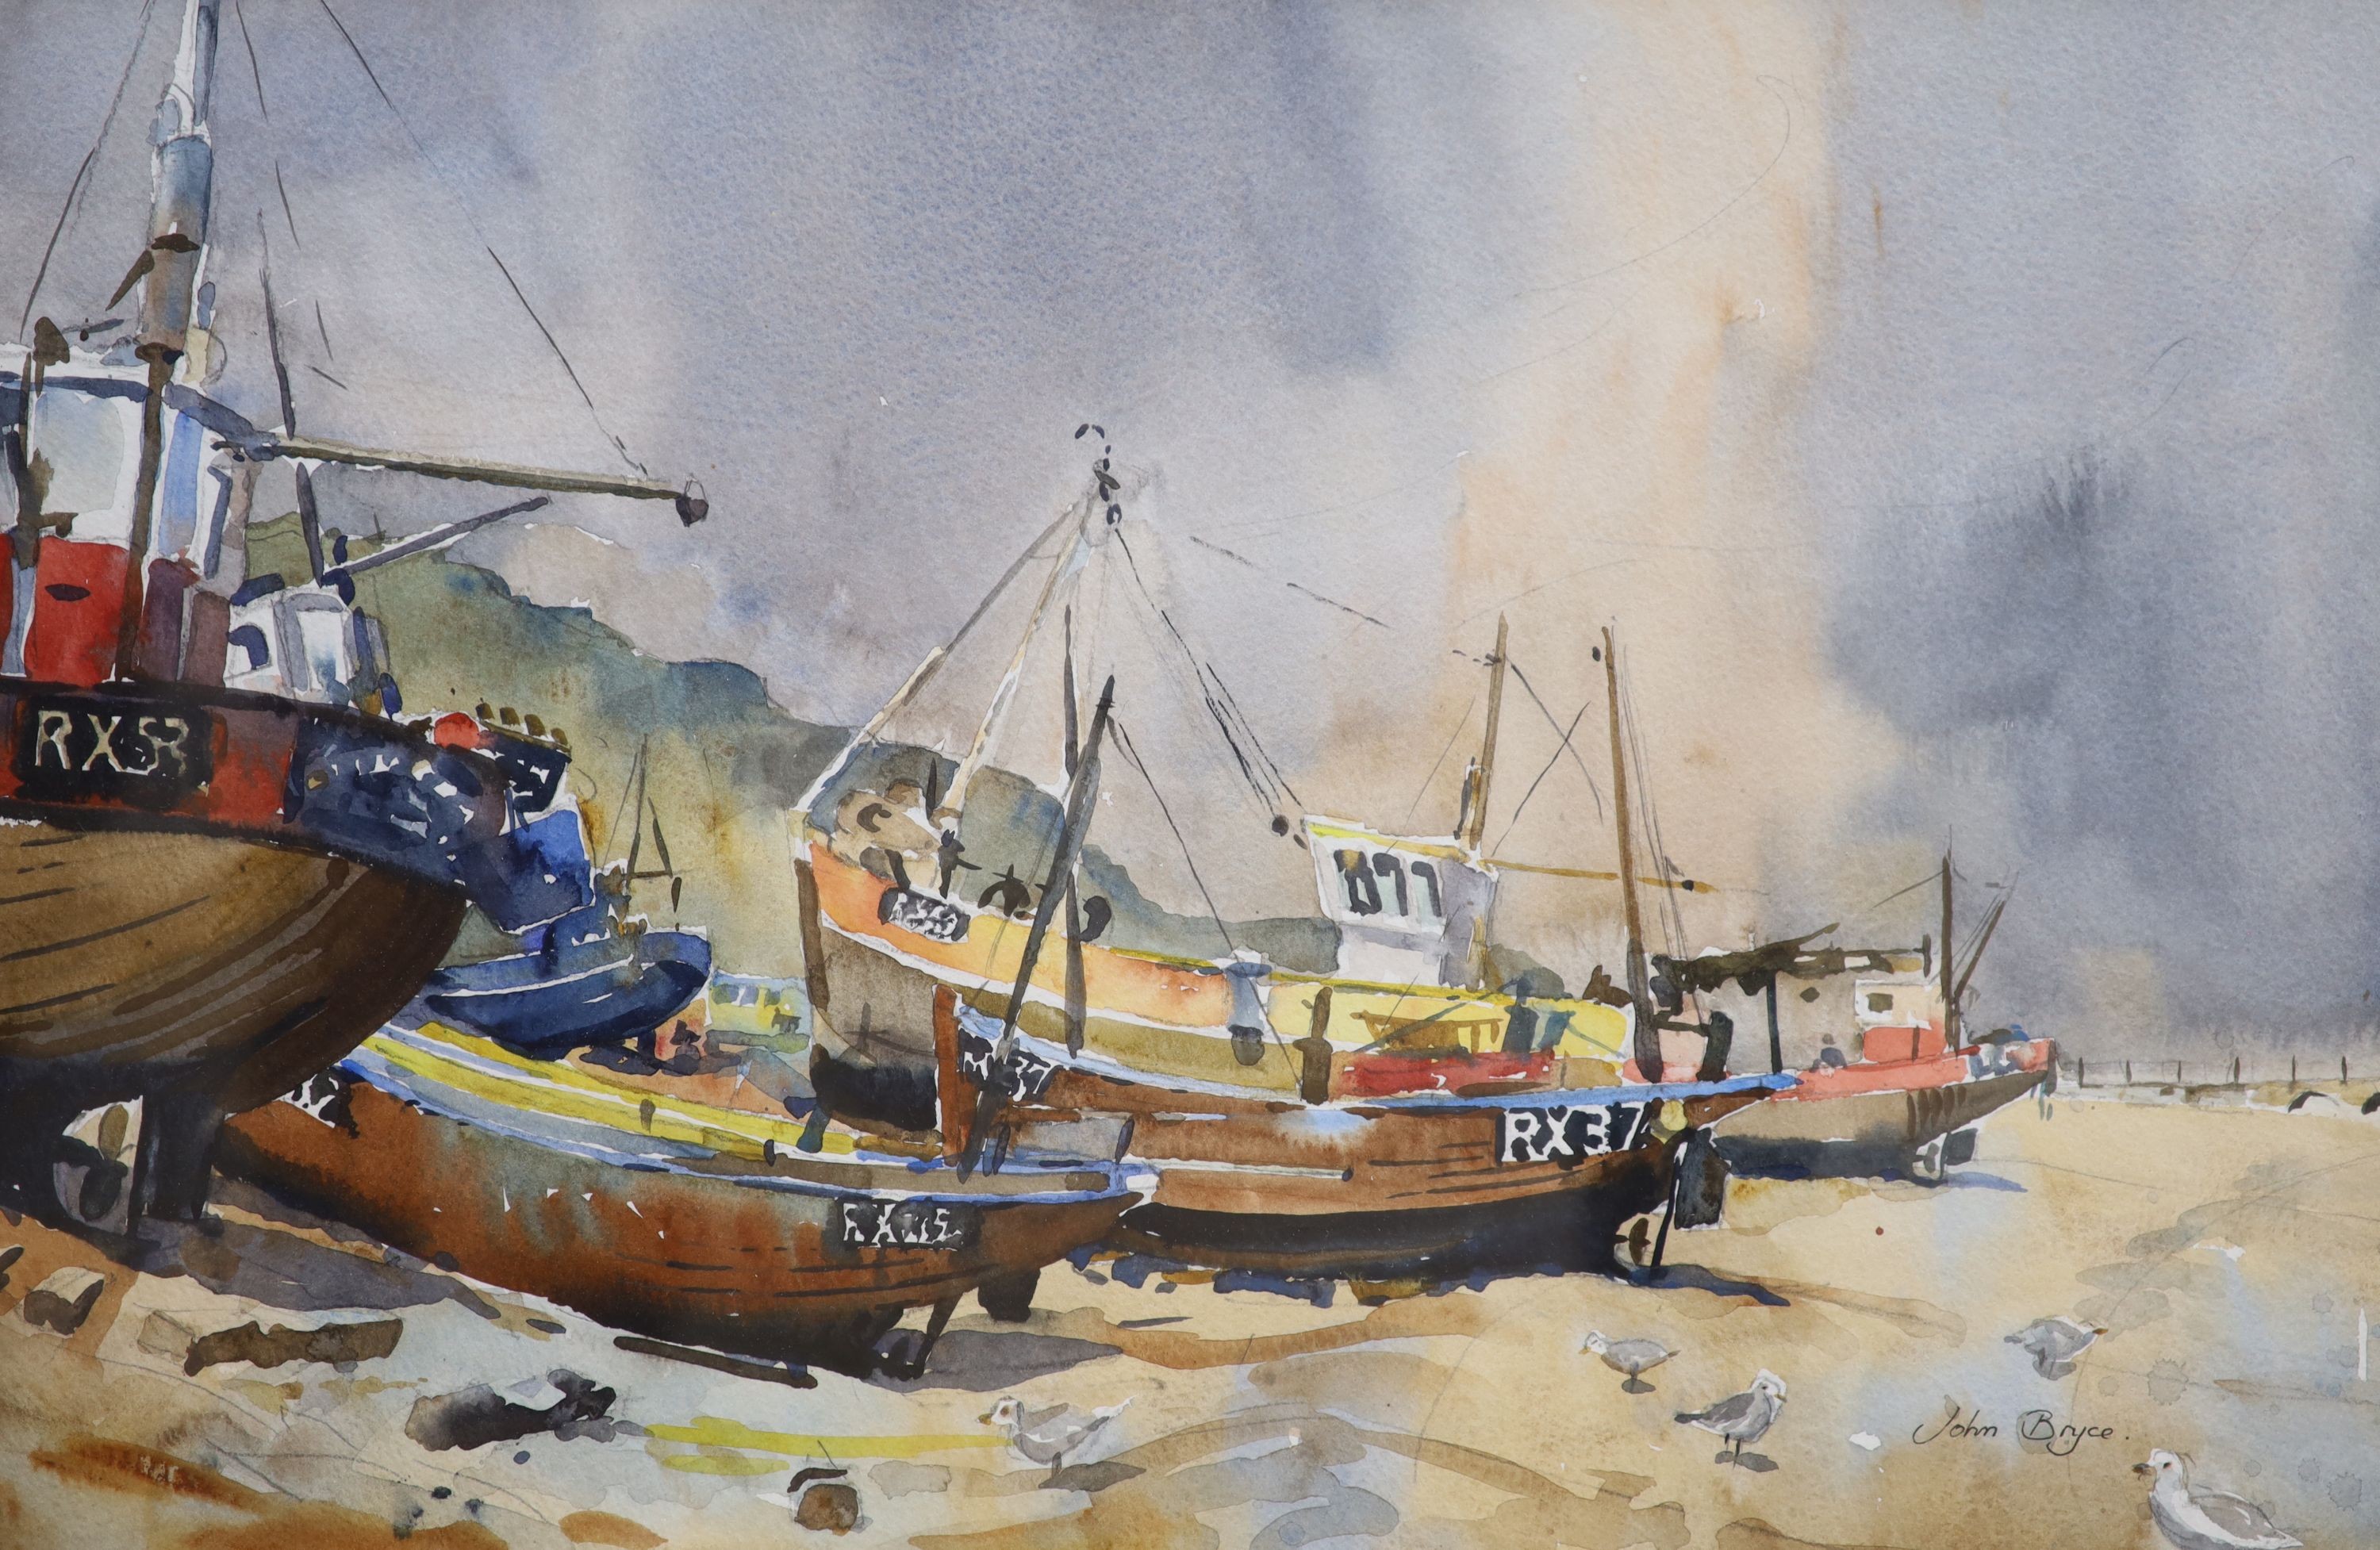 John Bryce (b. 1934), two watercolours, Southwark Bridge and St Paul's and Fishing boats, signed, 24 x 34cm and 35 x 54cm